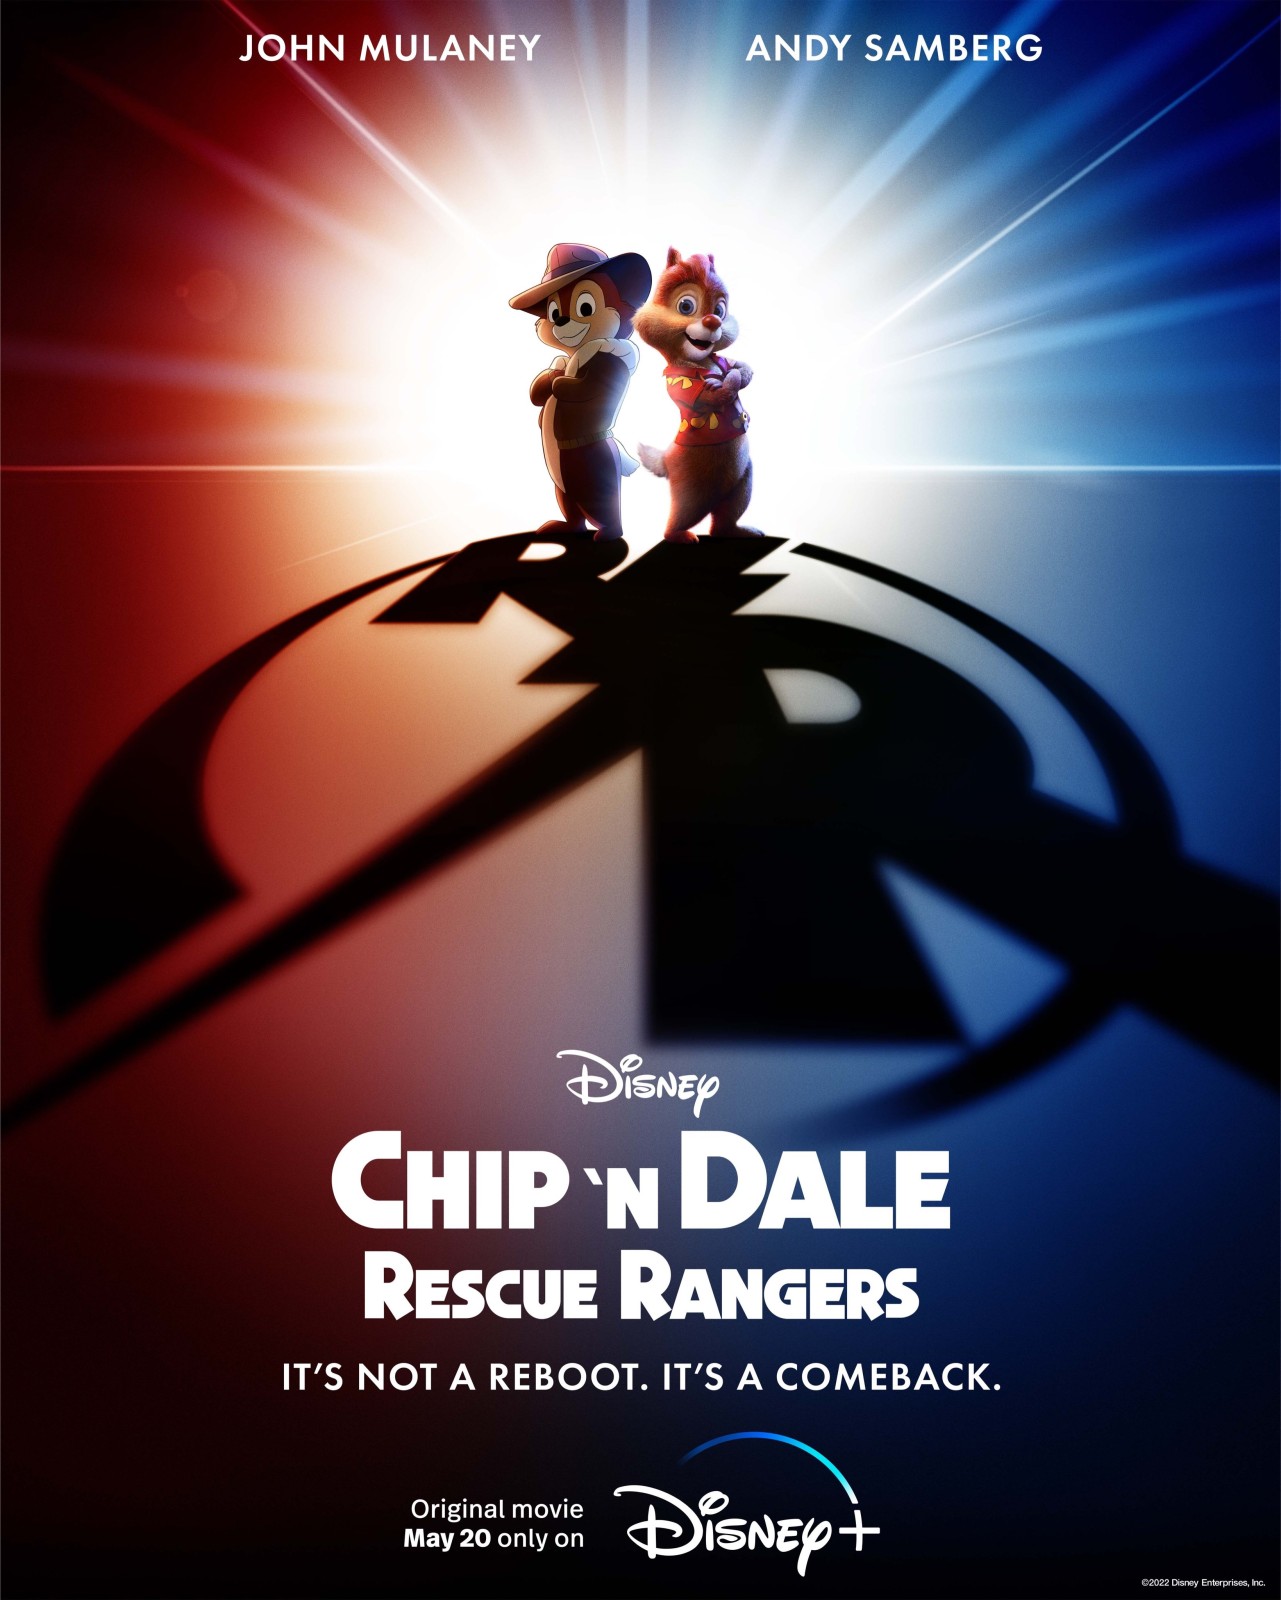 Chip y Dale, Chip 'n Dale, Rescue Rangers, Chip and Dale